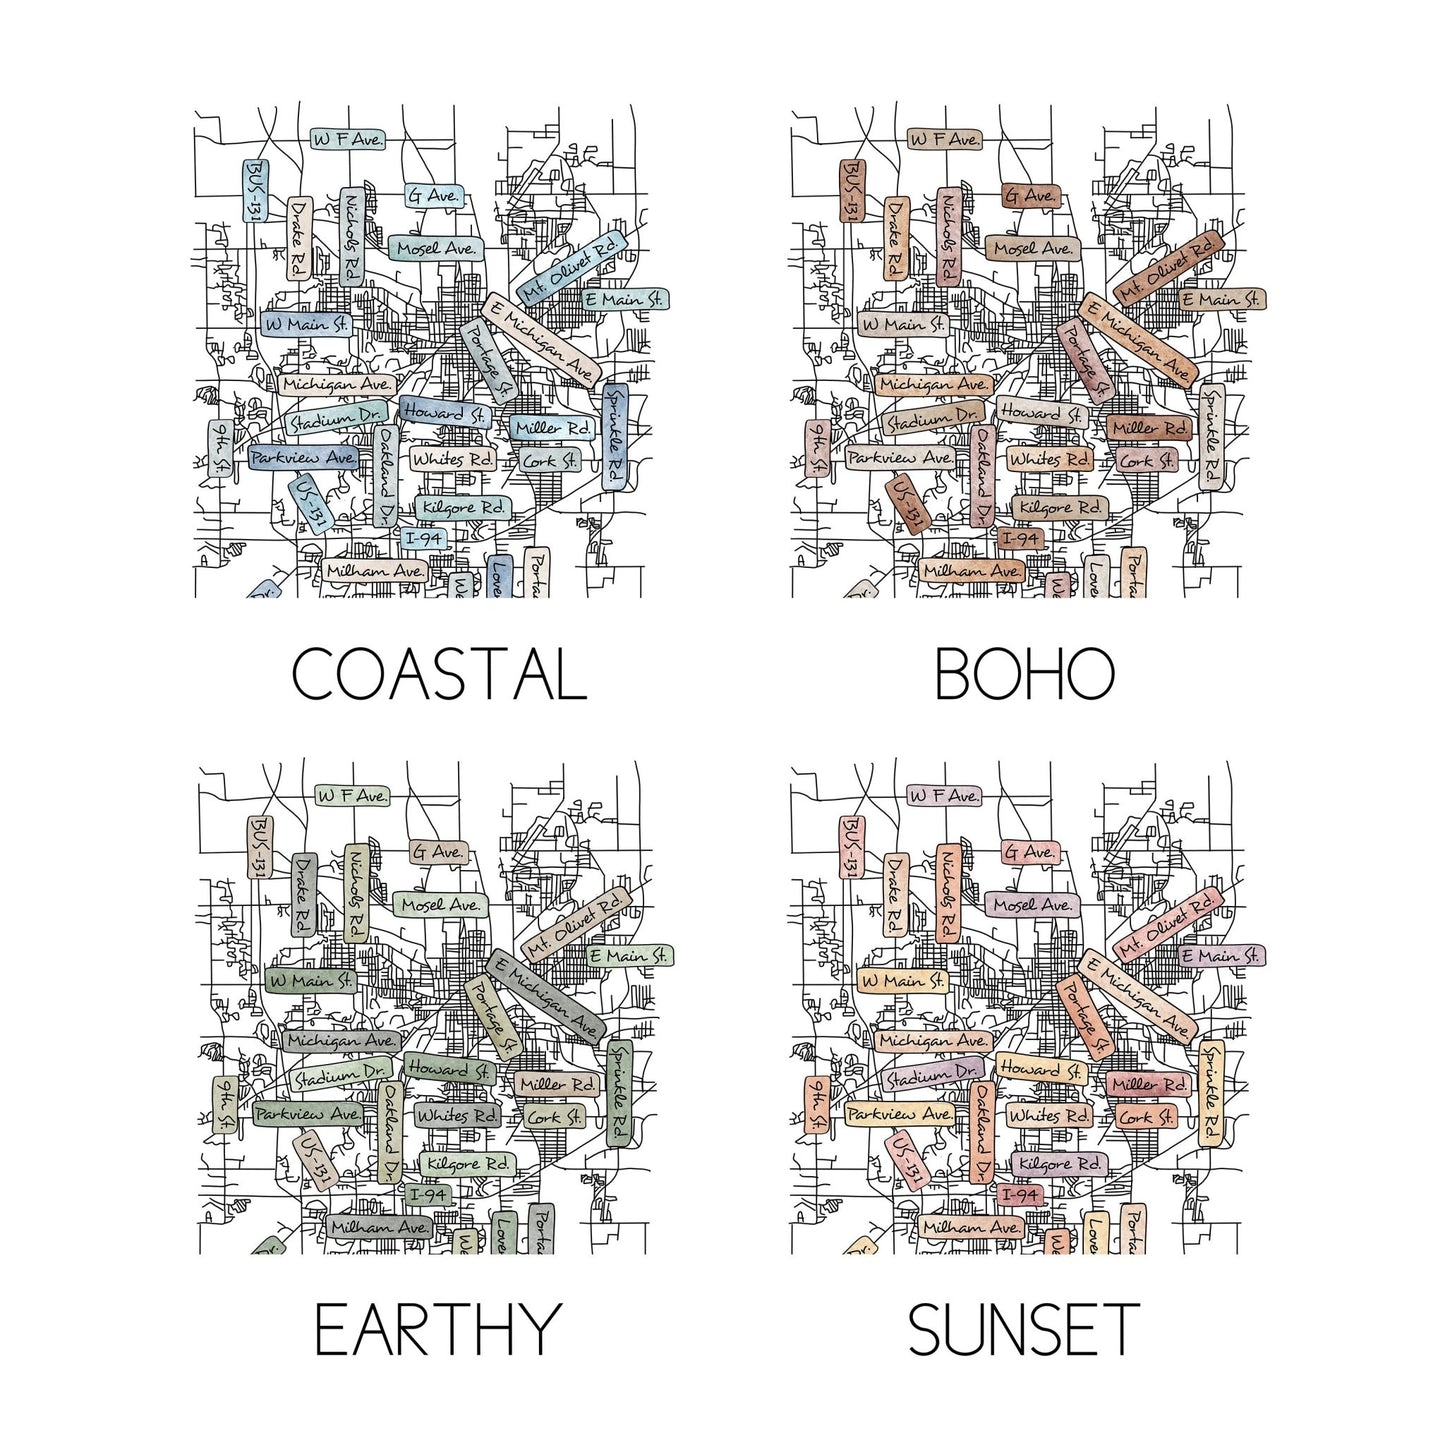 Examples of all four colors available for city art coasters: coastal, sunset, earthy, boho